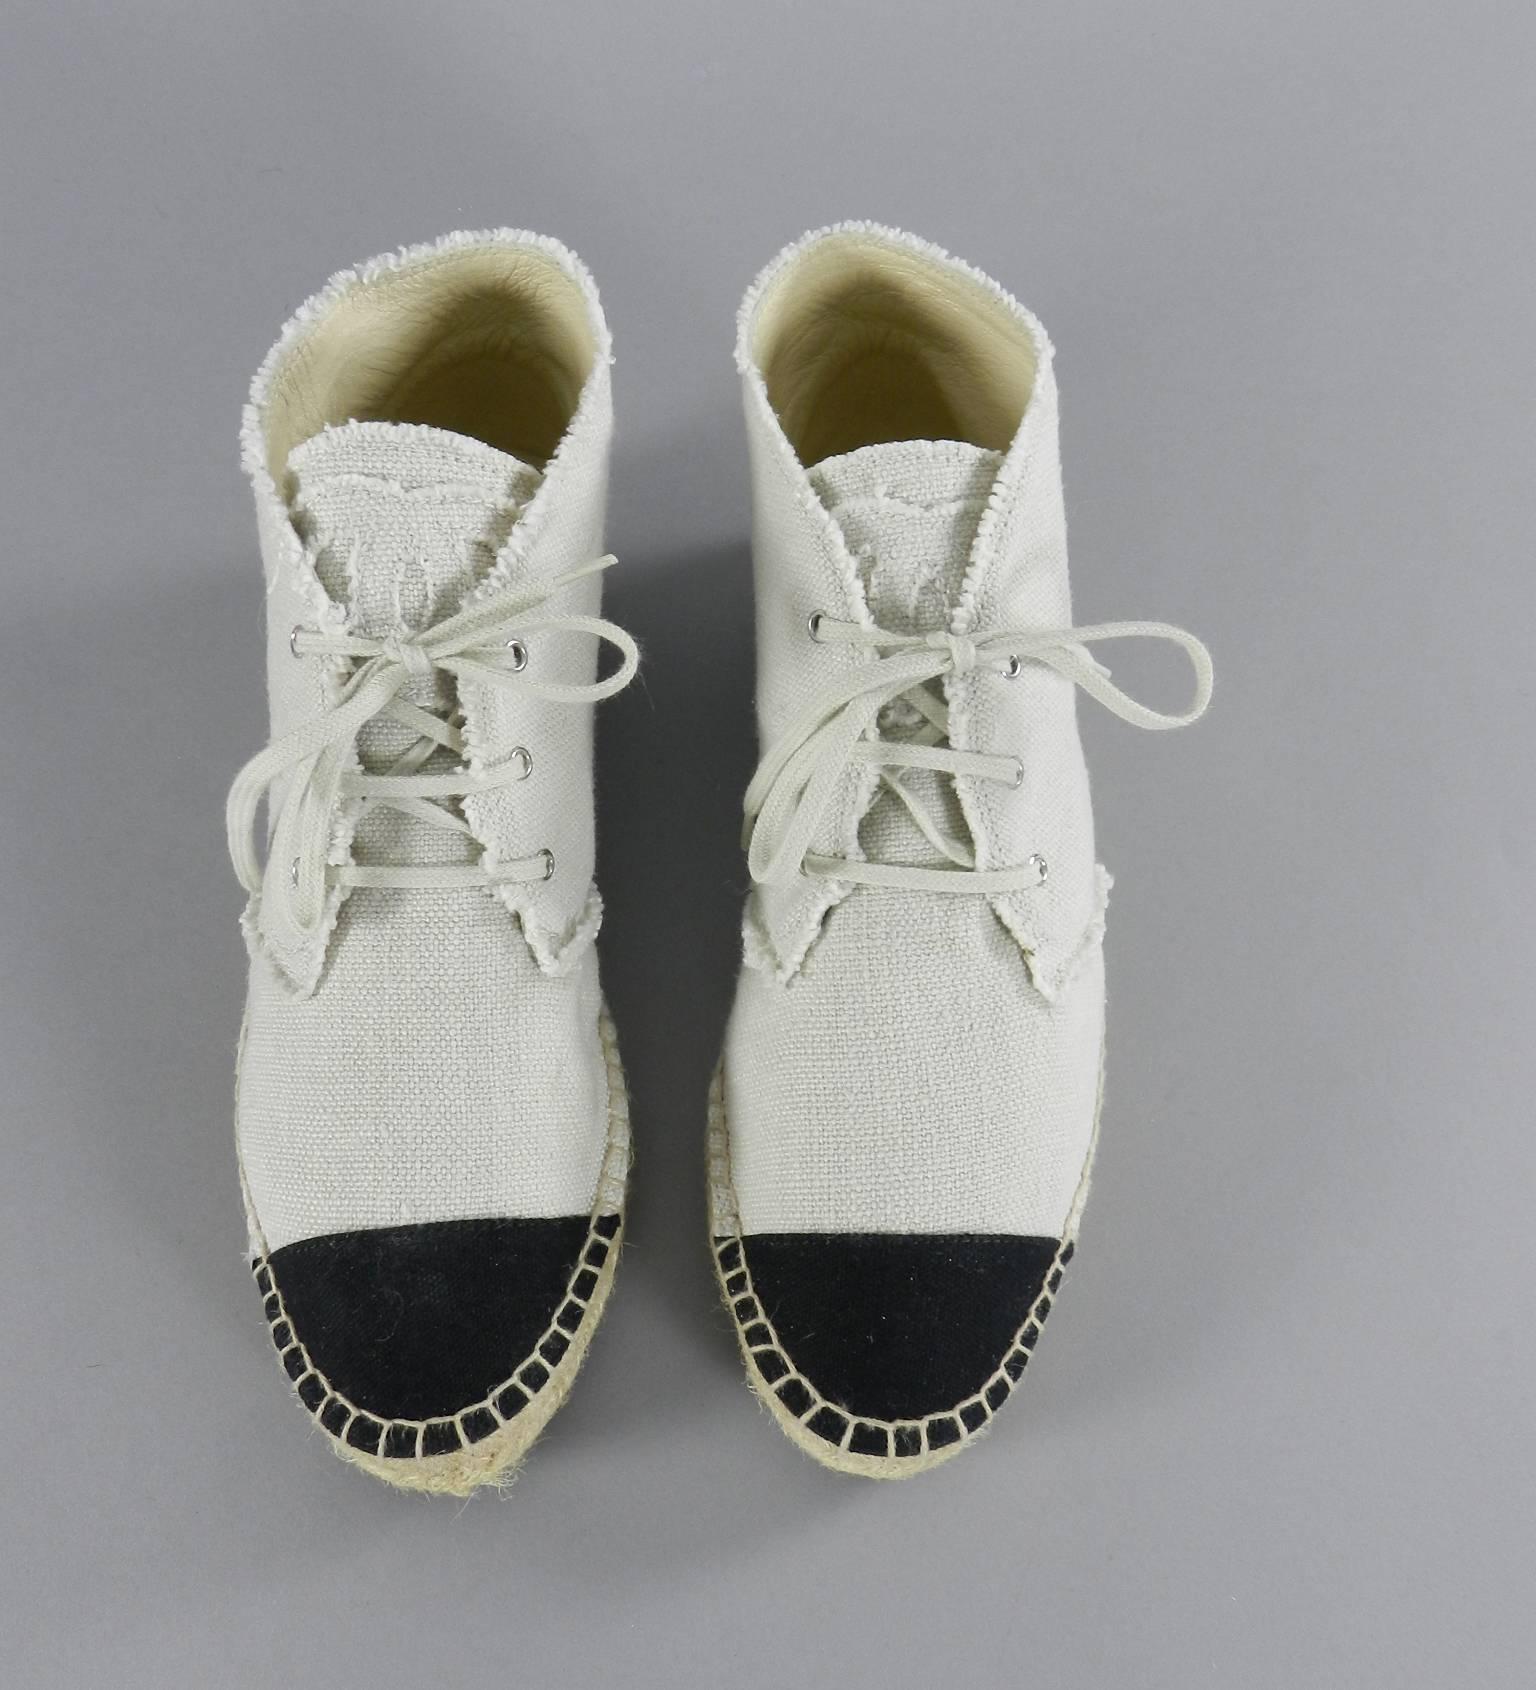 Chanel 2015 cruise / resort high top espadrille shoes. Unworn - no box.  Natural linen color with CC at tongue and black cap toe and heel.  Marked size 41. 

We ship worldwide. 